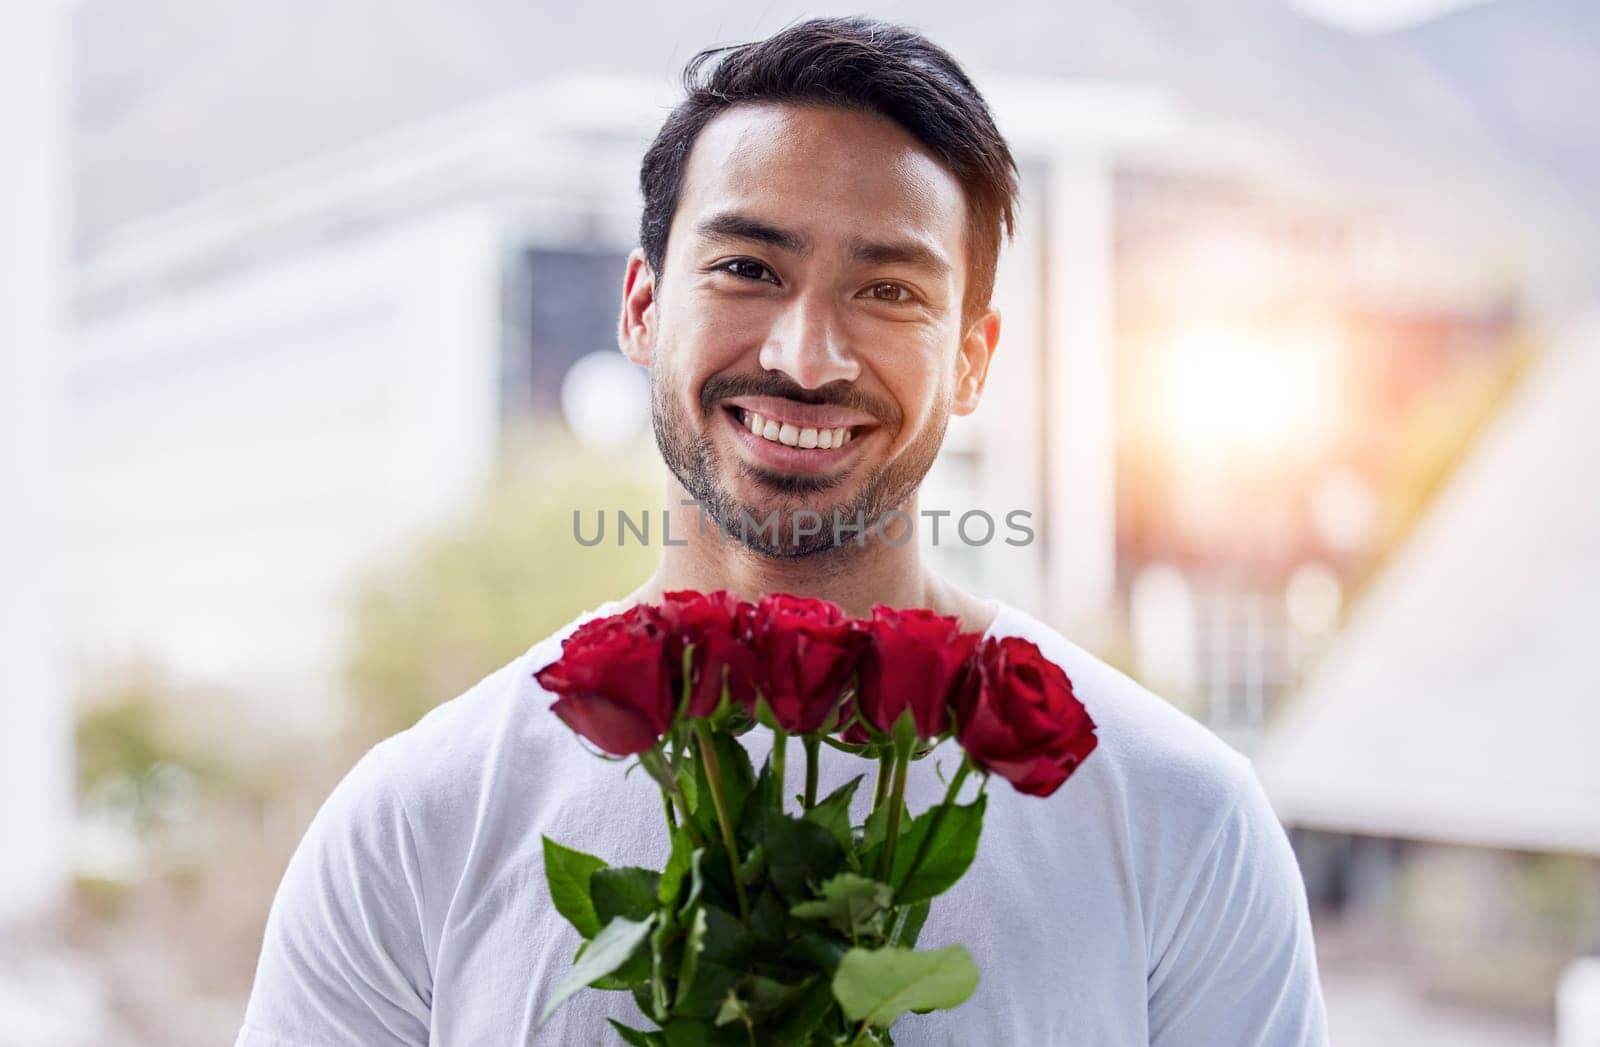 Smile, portrait and man with bouquet of roses for date, romance and hope for valentines day. Love confession, romantic gift and happy male holding flowers outside in city for proposal or engagement